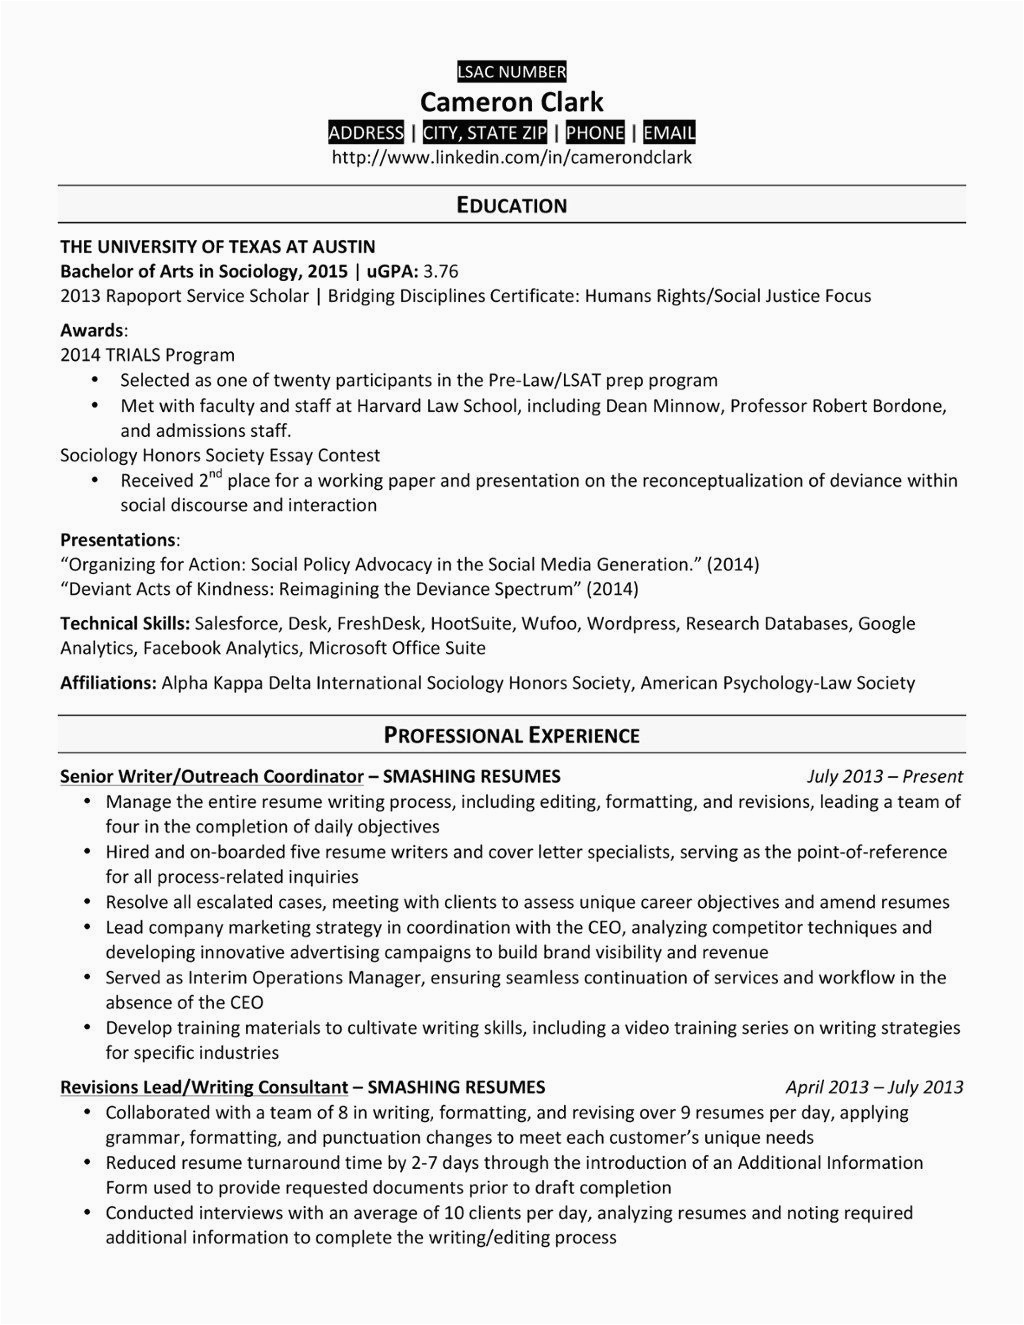 Best Resume Template for Graduate School Pin On Best Resume Example 2020